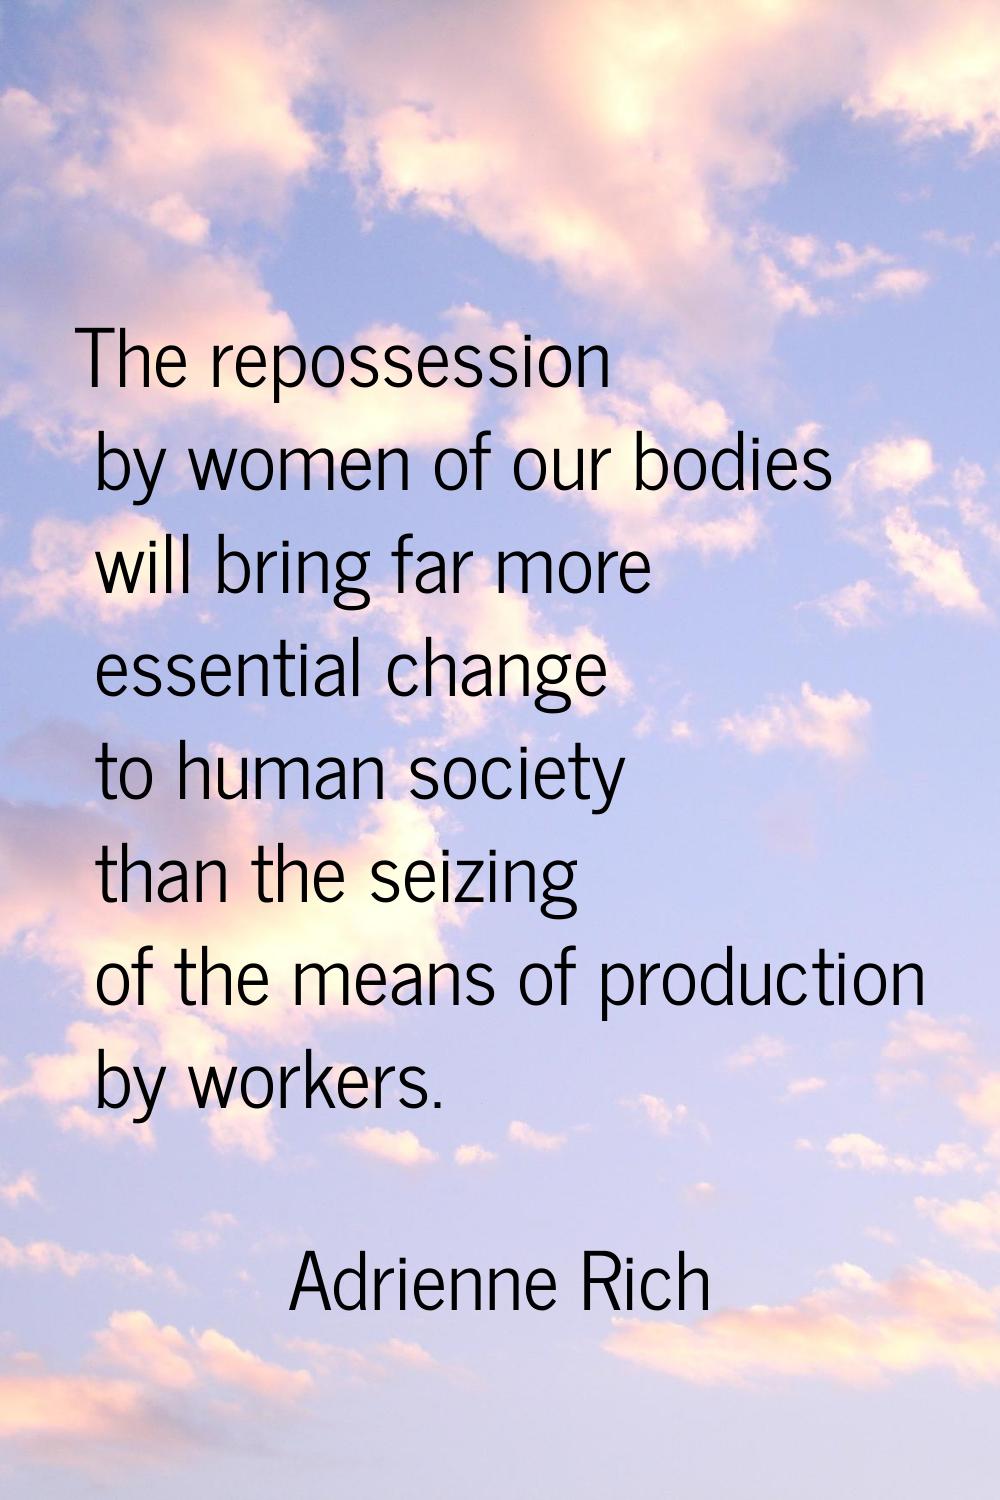 The repossession by women of our bodies will bring far more essential change to human society than 